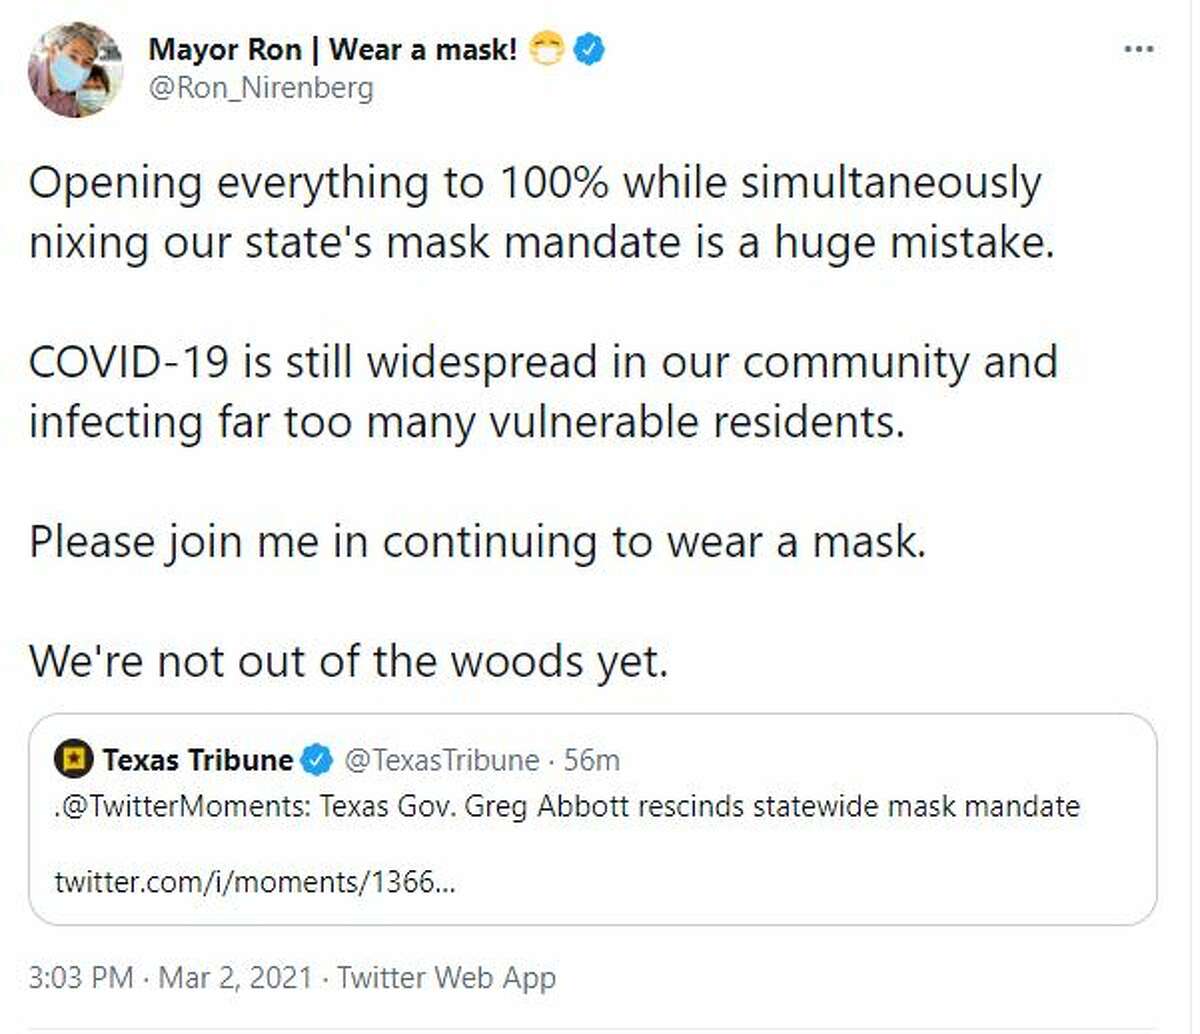 SAN ANTONIO MAYOR RON NIRENBERG "Opening everything to 100% while simultaneously nixing our state's mask mandate is a huge mistake," the mayor wrote on Twitter. "COVID-19 is still widespread in our community and infecting far too many vulnerable residents." He added for the community to please join him in continuing to wear a mask. "We're not out of the woods yet."